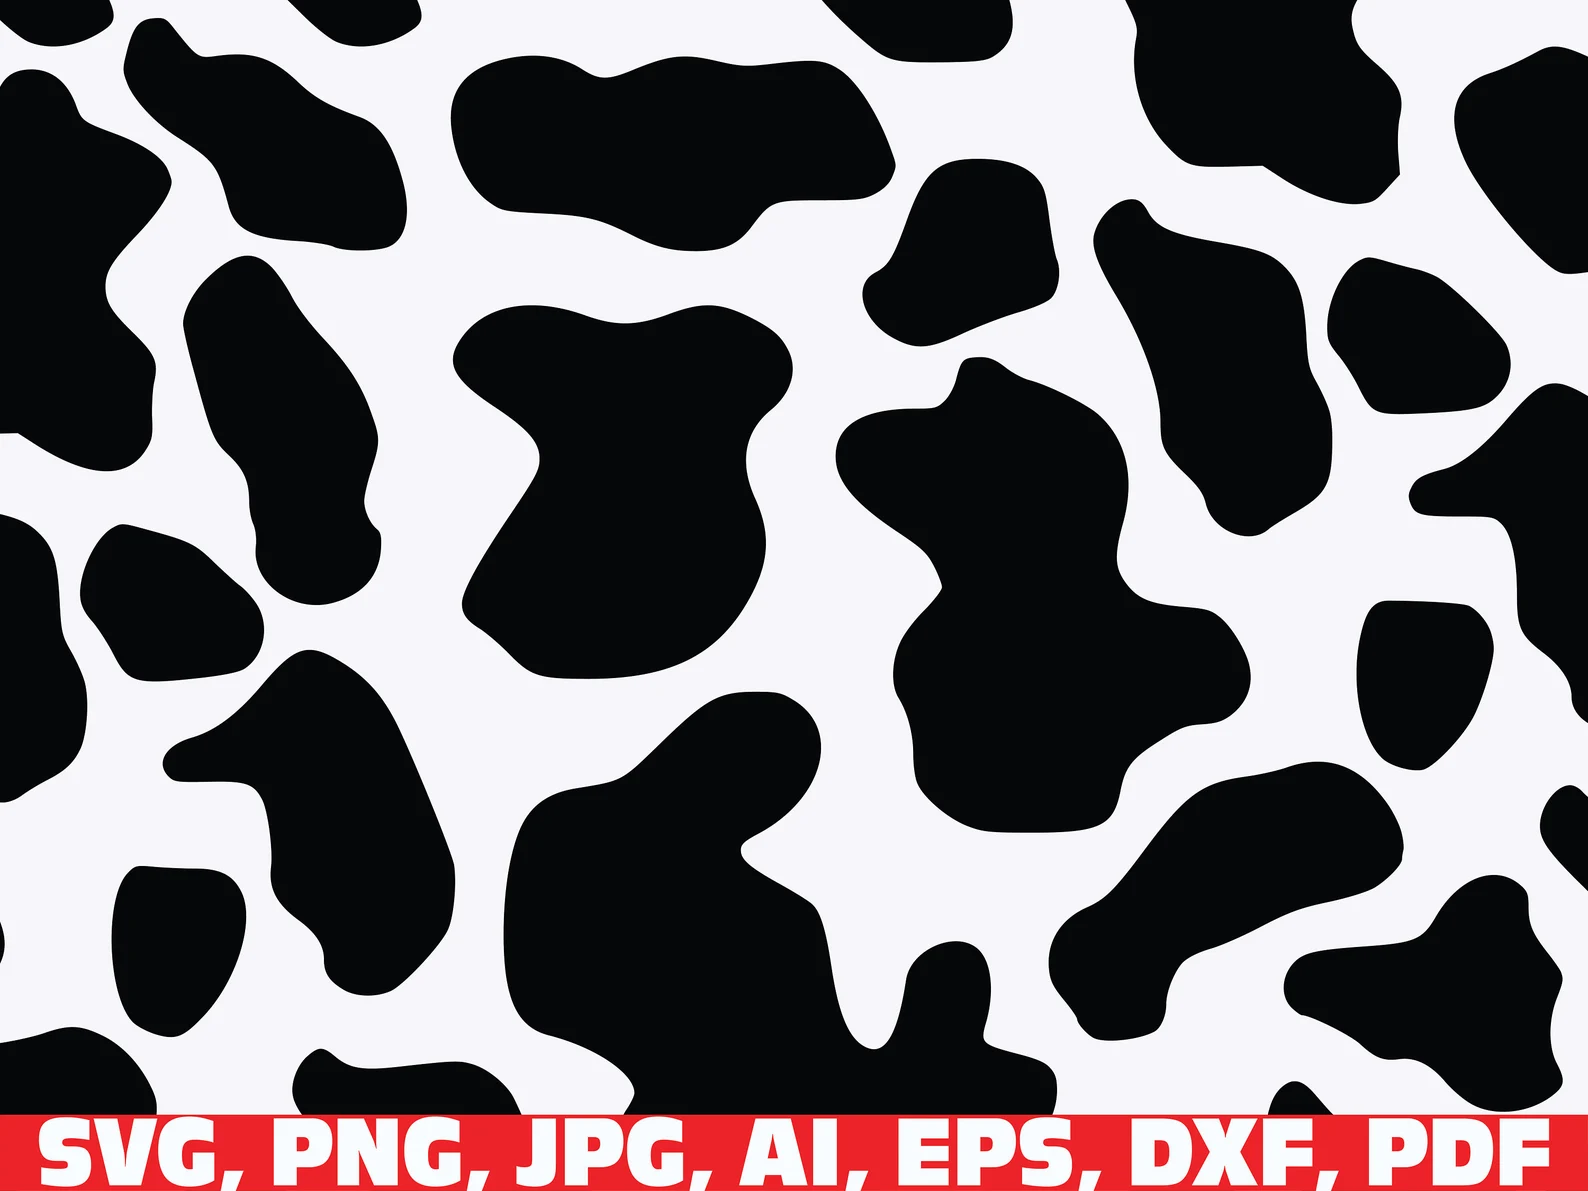 Black and white cow pattern with a red border.